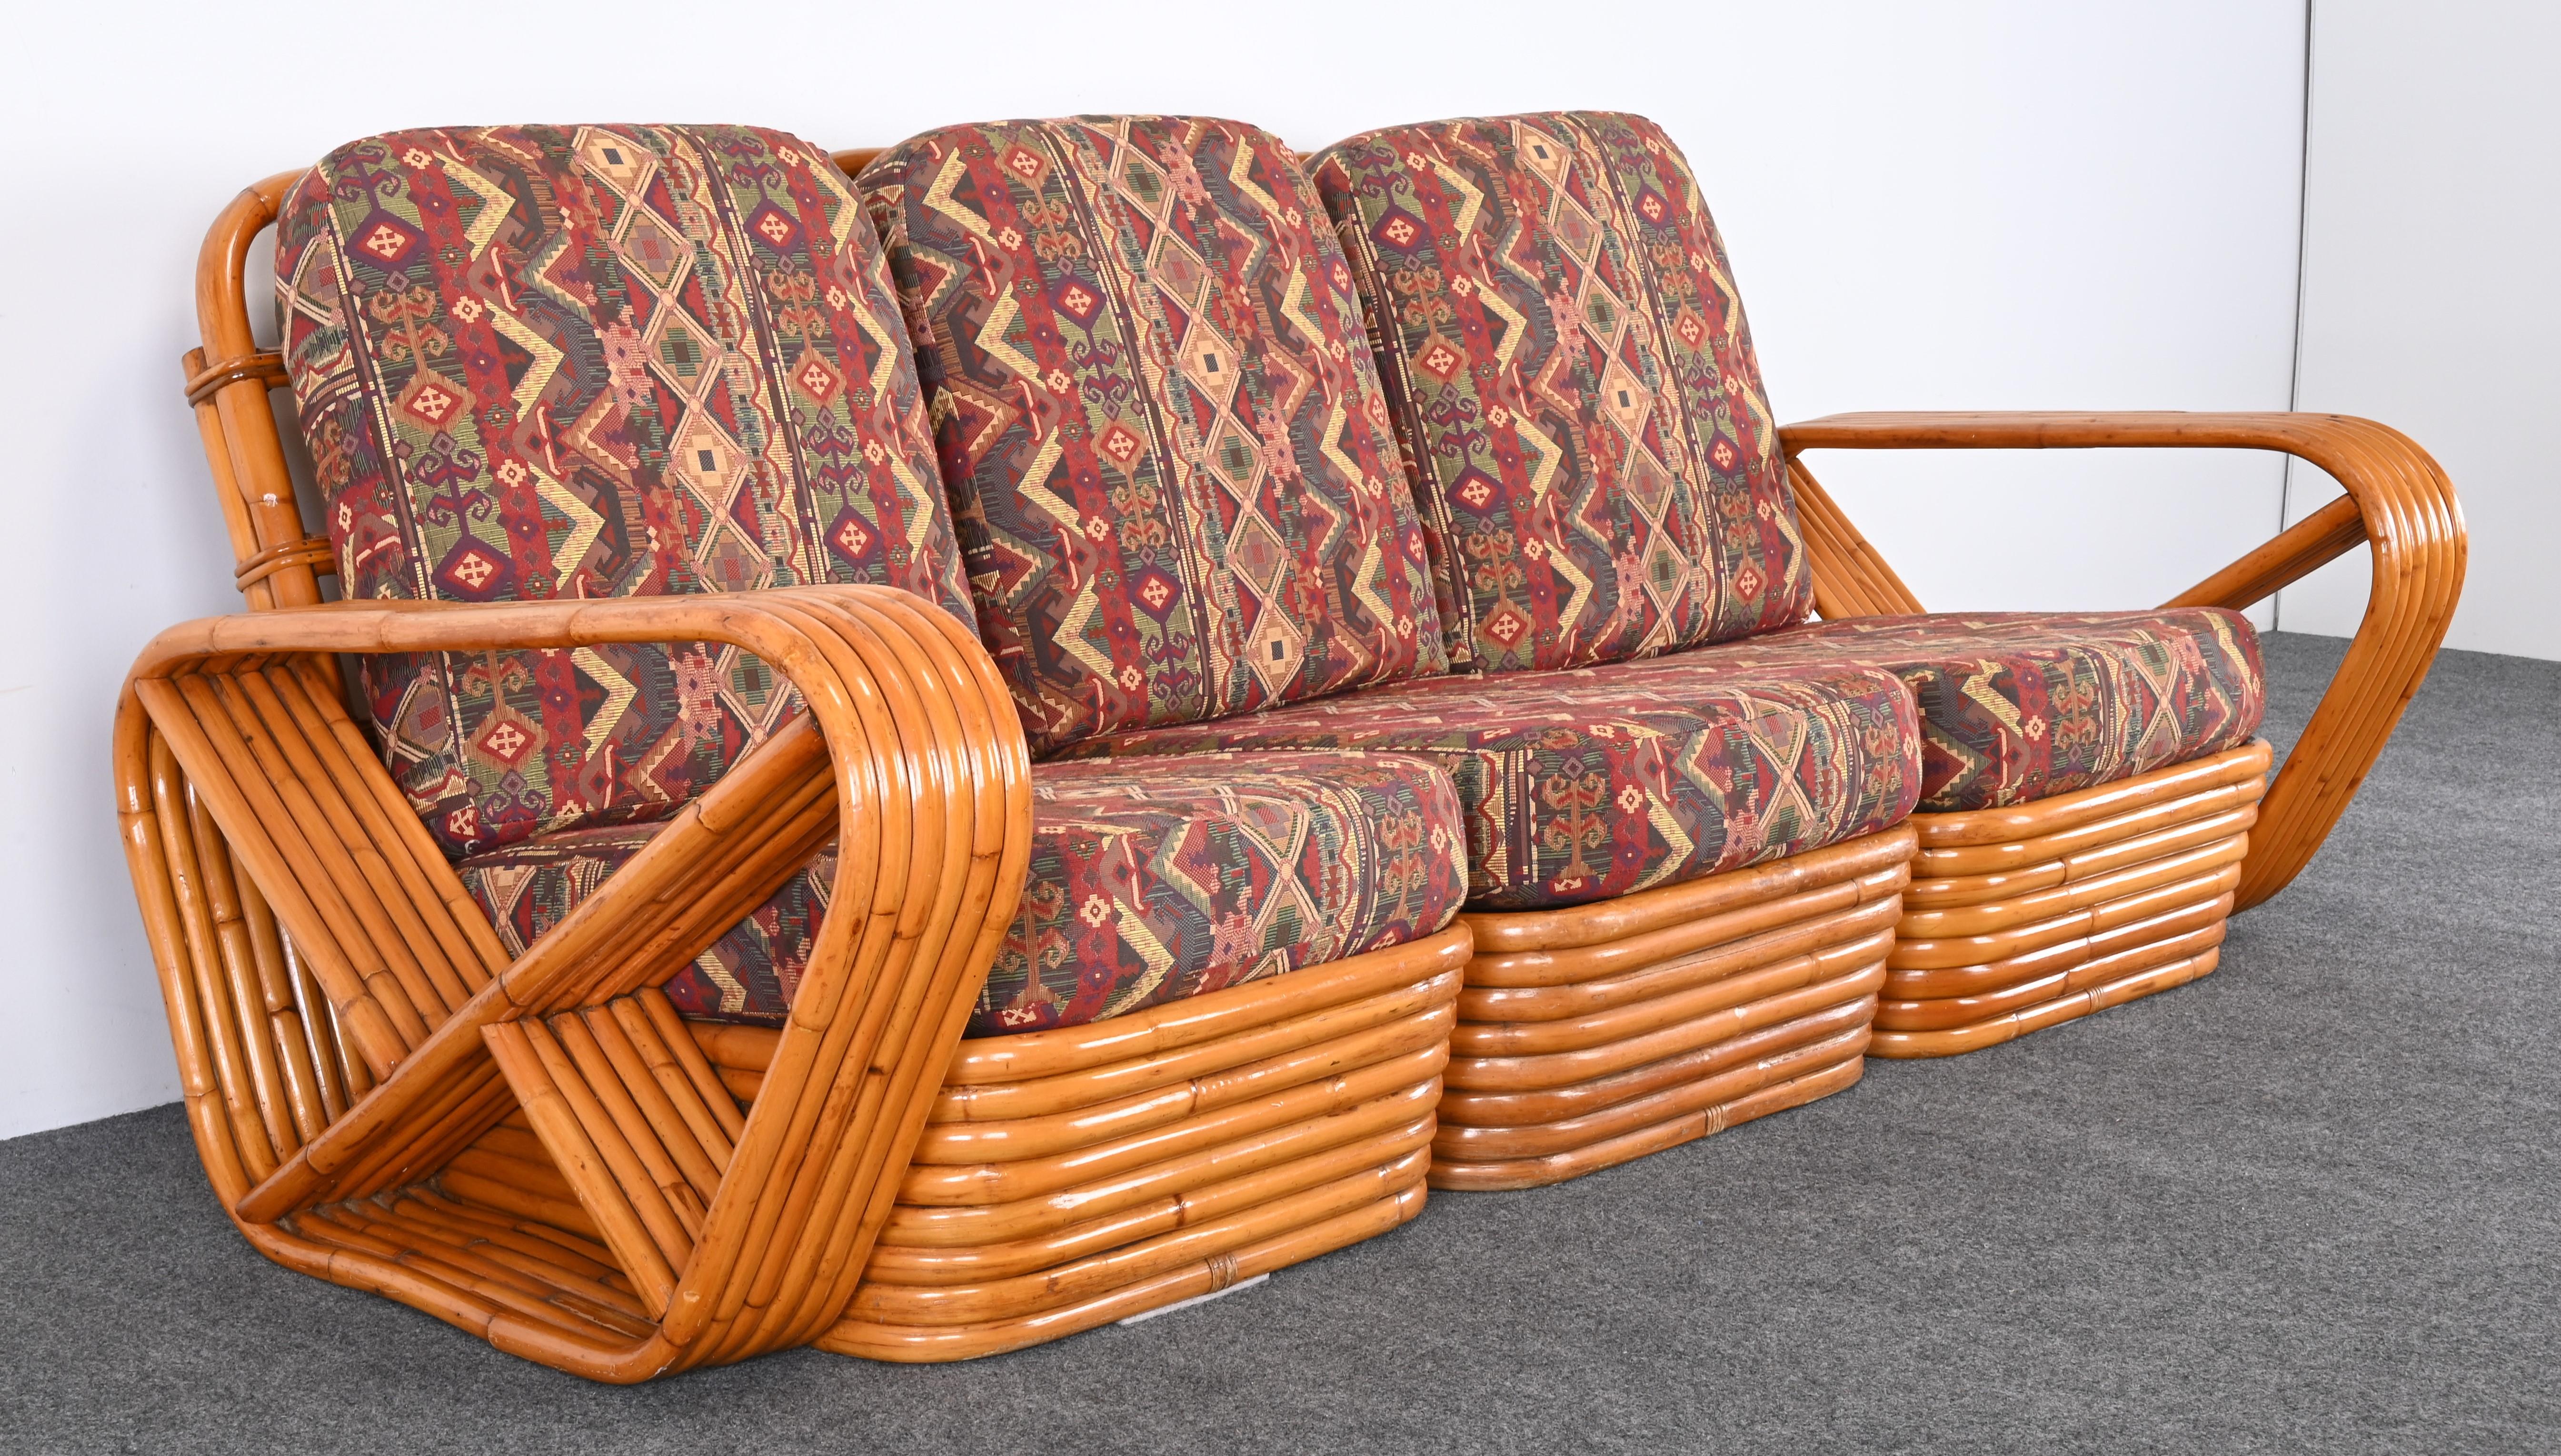 Upholstery Set of Paul Frankl Style Rattan Furniture, 1940s For Sale